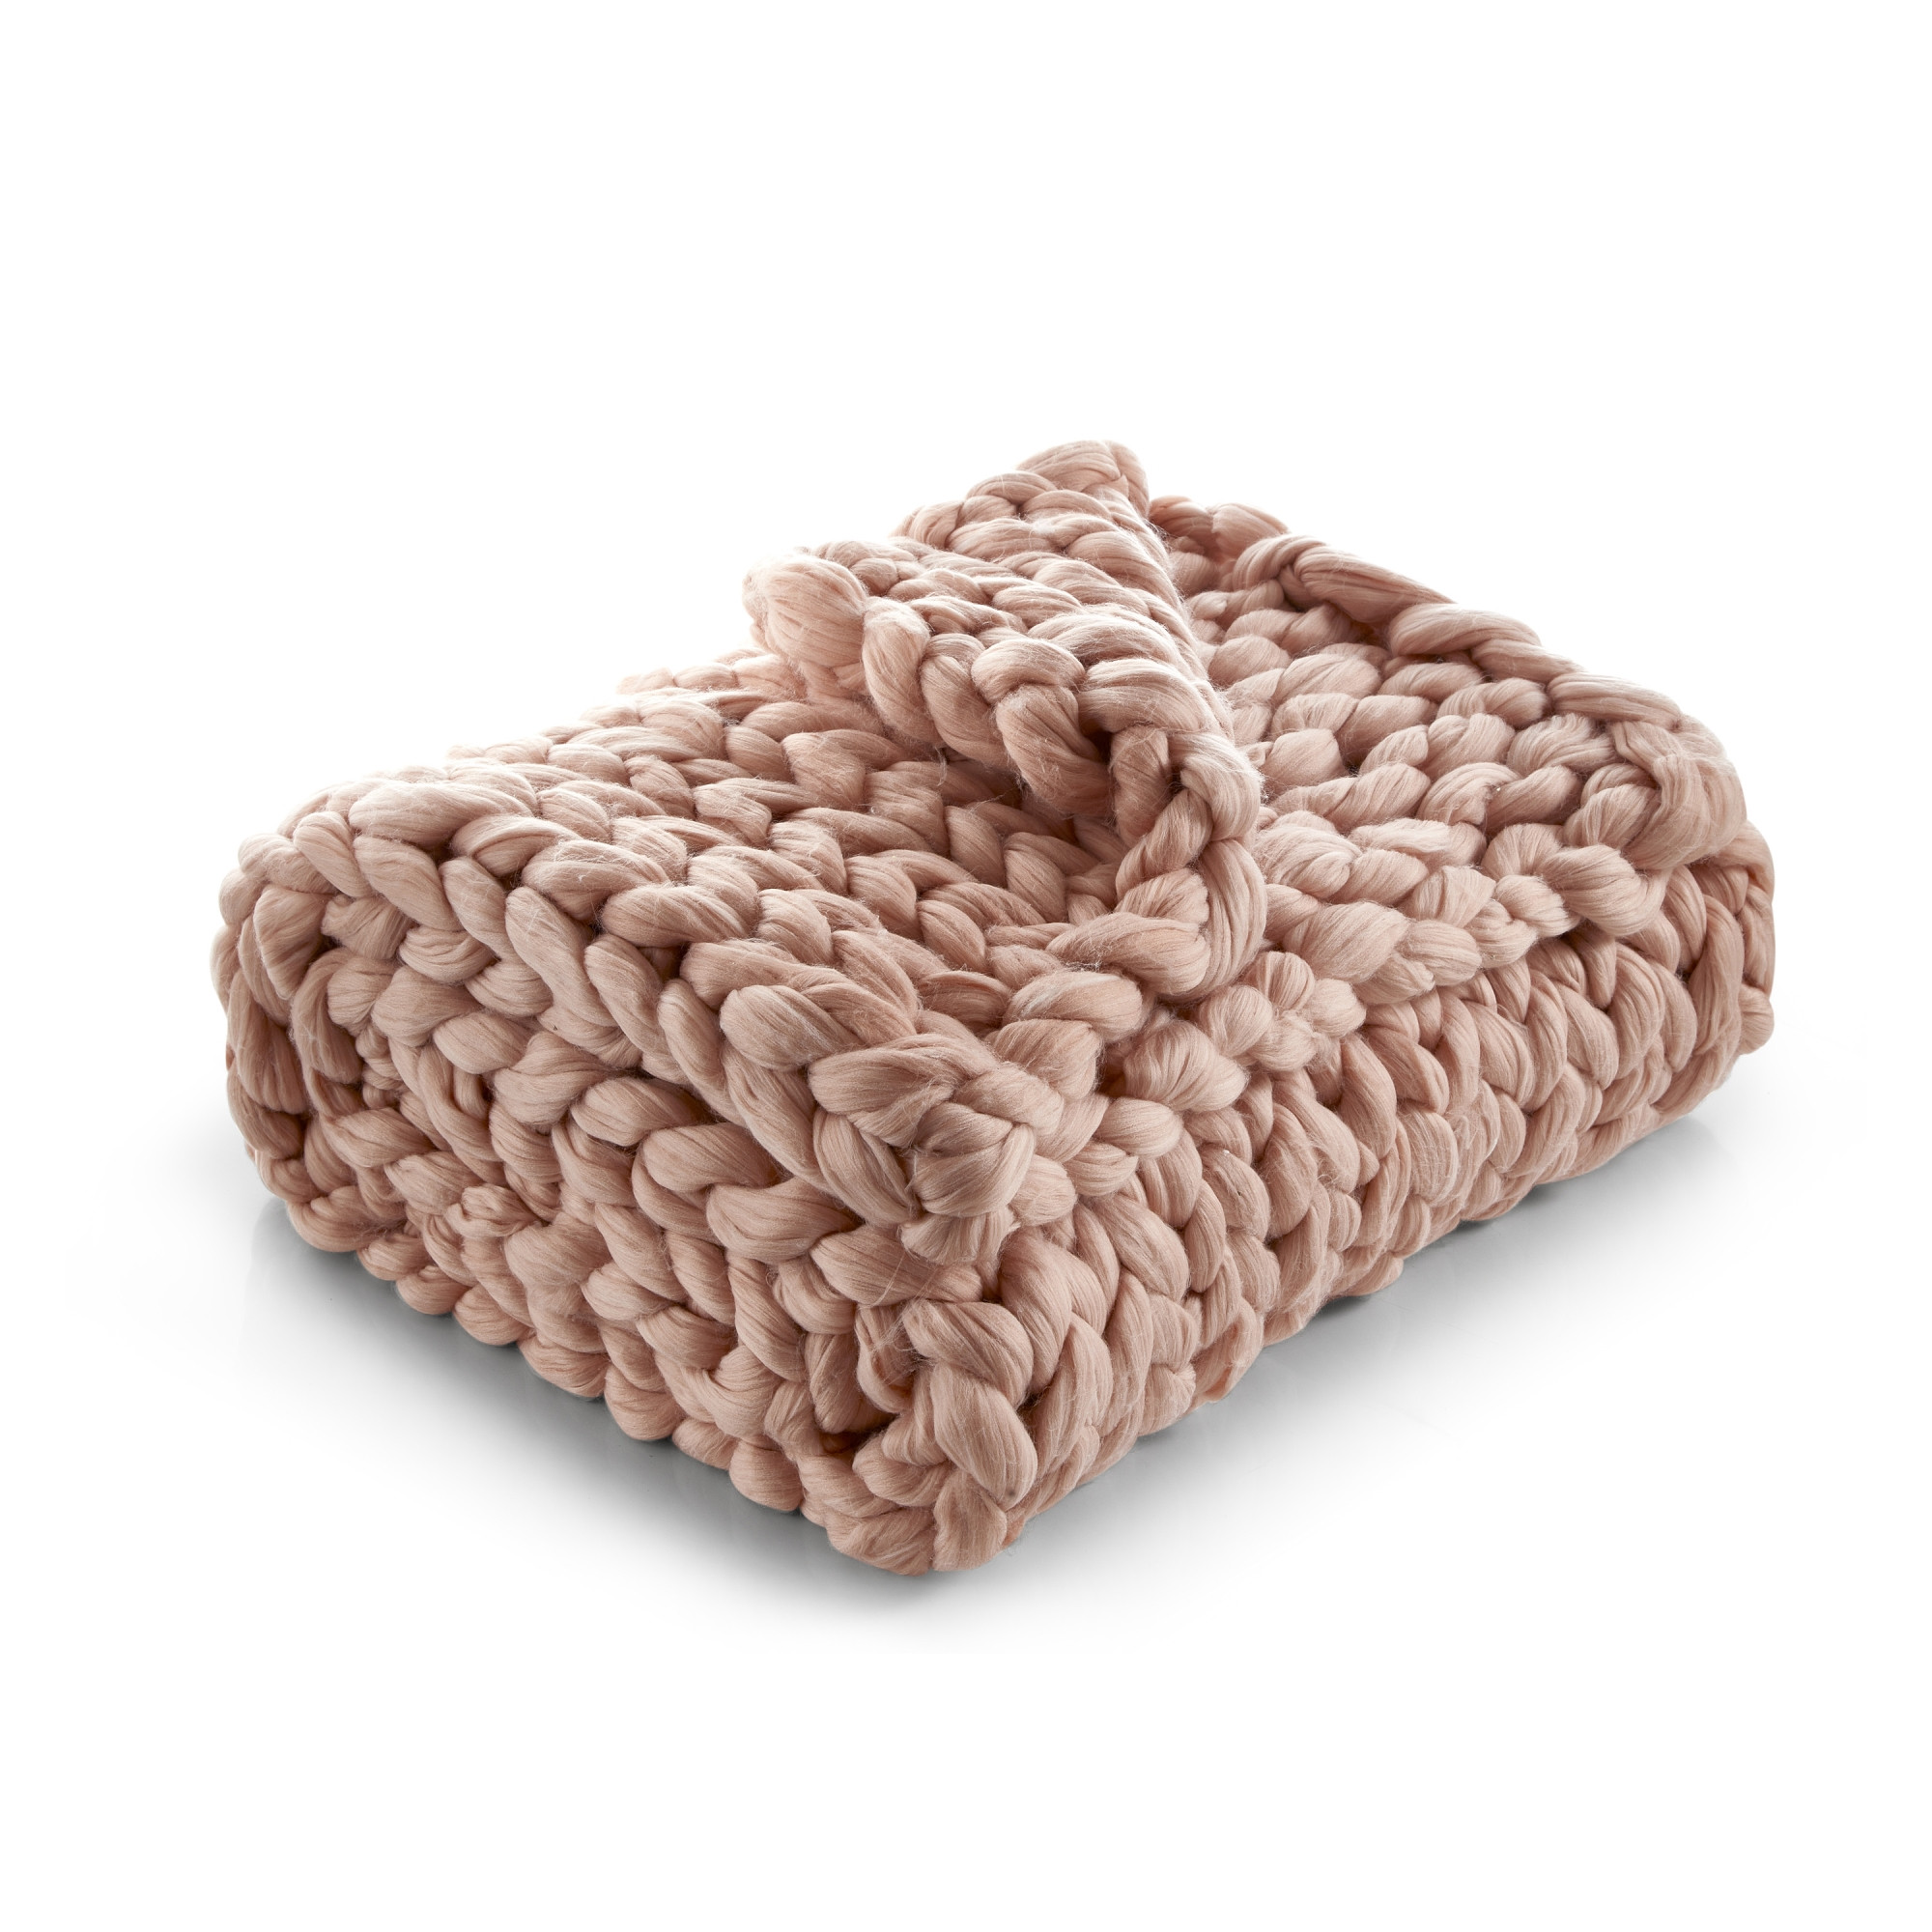 Blush Knitted Polyester Solid Color Throw Blanket-531280-1